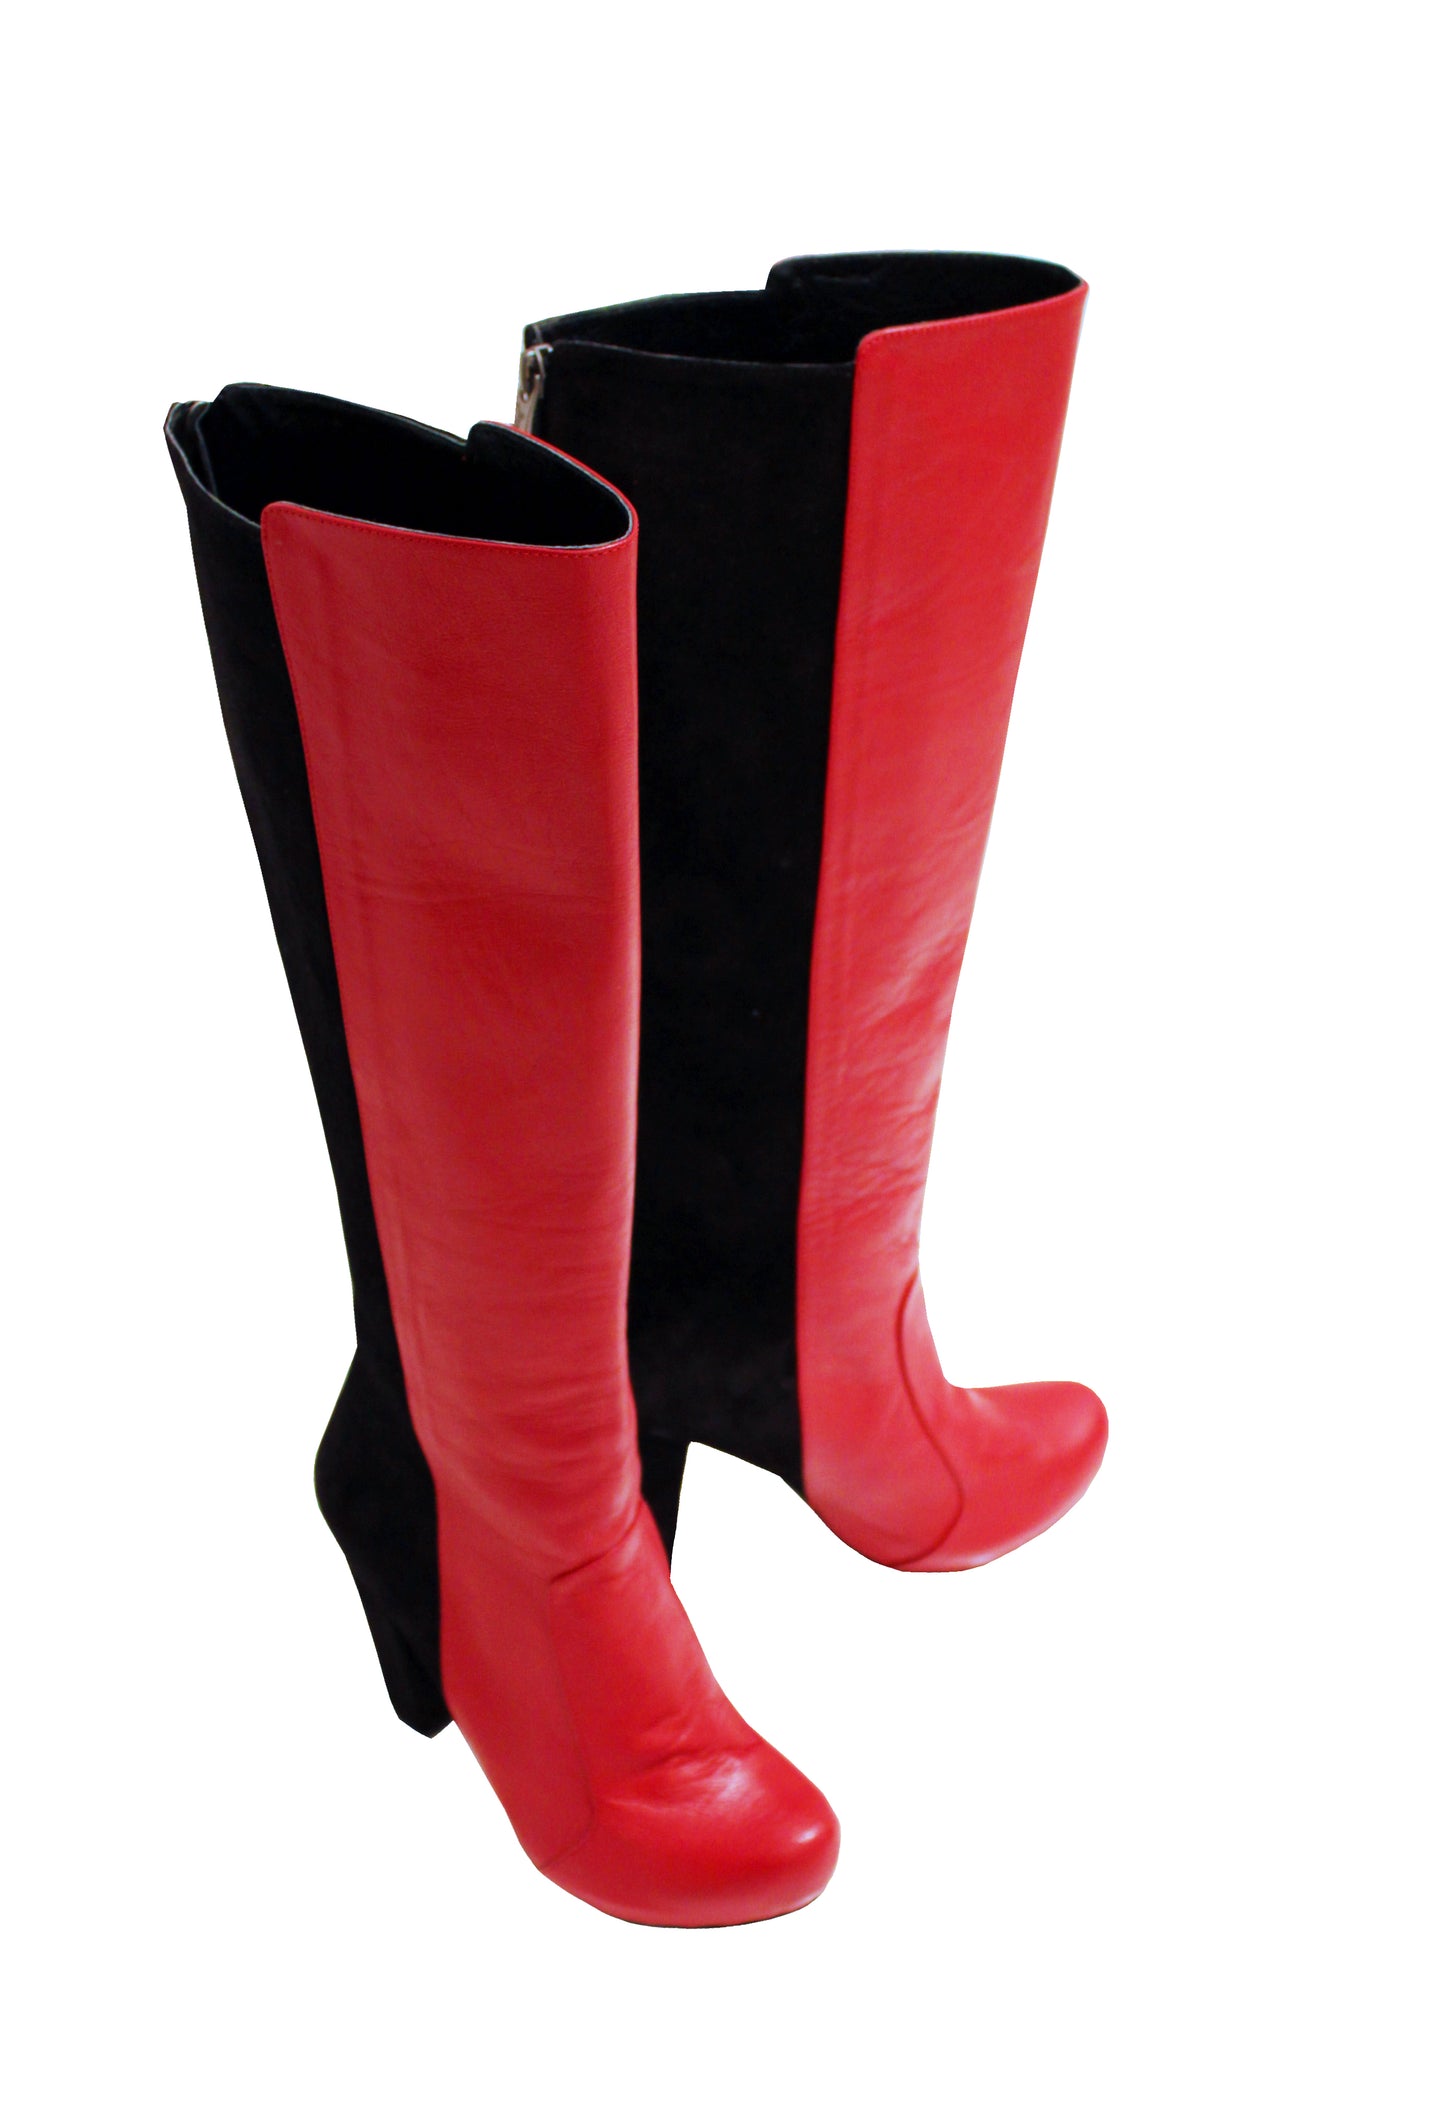 White/Red Leather Black Suede - Chunky Heel